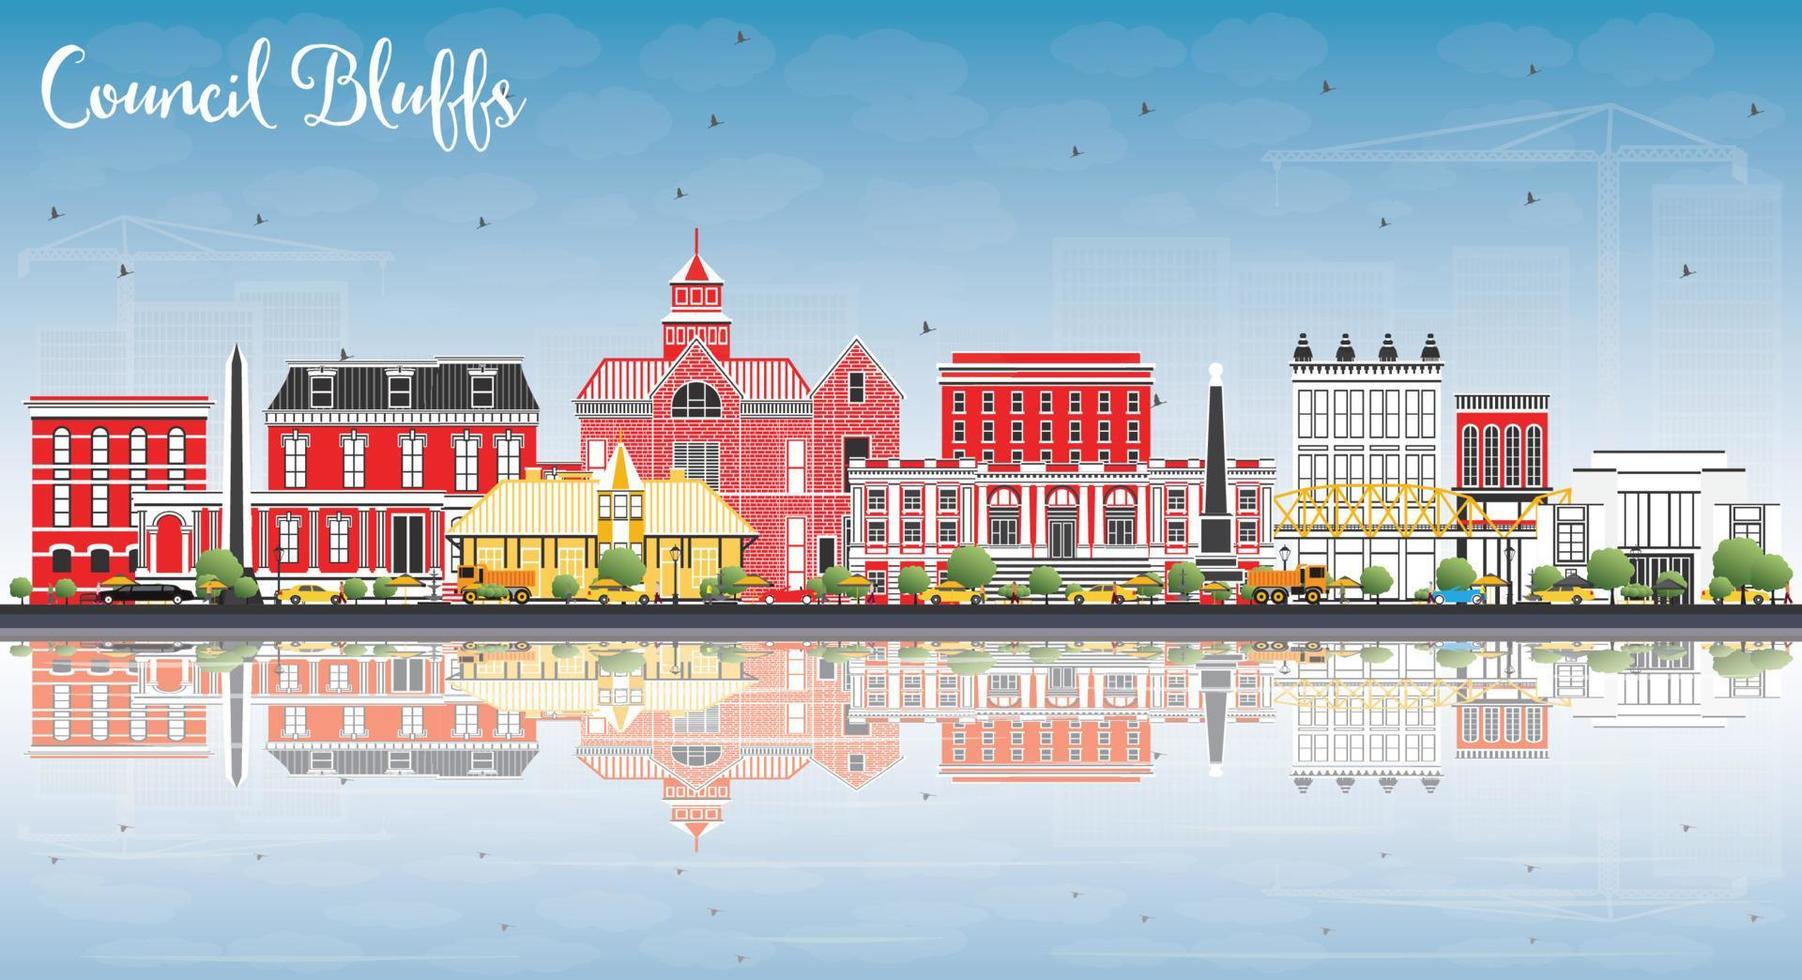 Council Bluffs Iowa Skyline with Color Buildings, Blue Sky and Reflections. vector